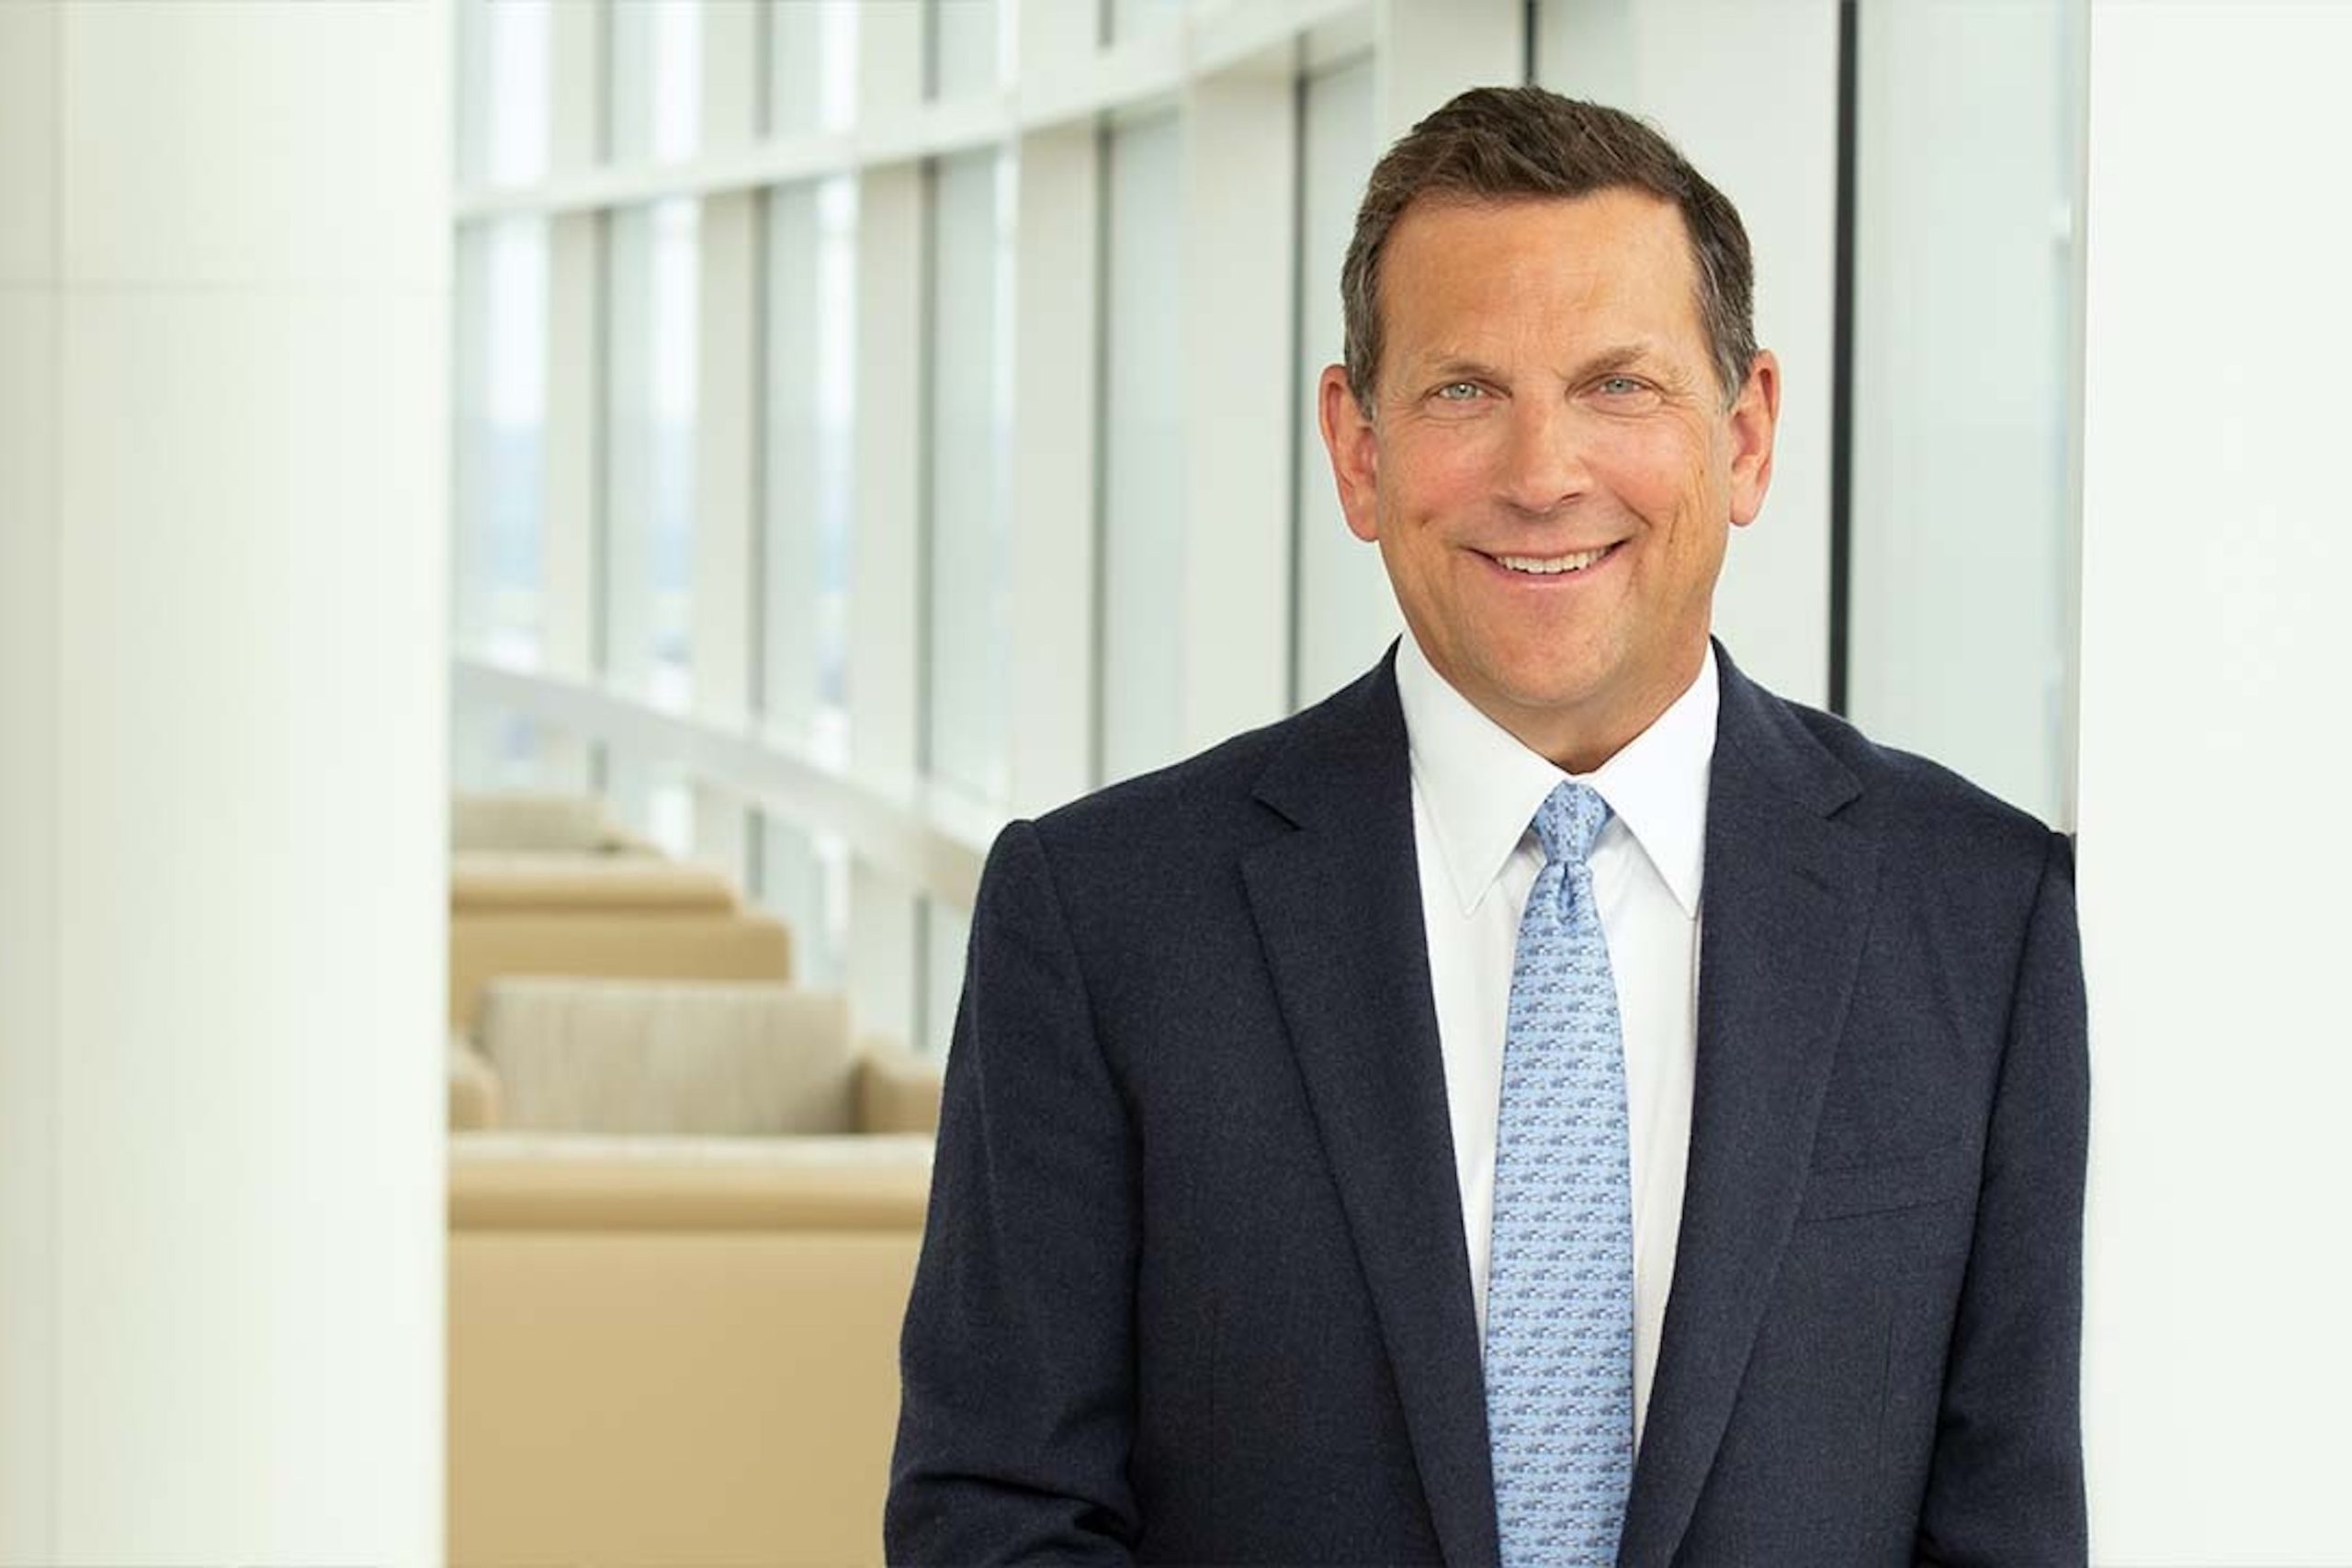 Northwestern Mutual CEO: "Look at volatility as an opportunity not a risk"